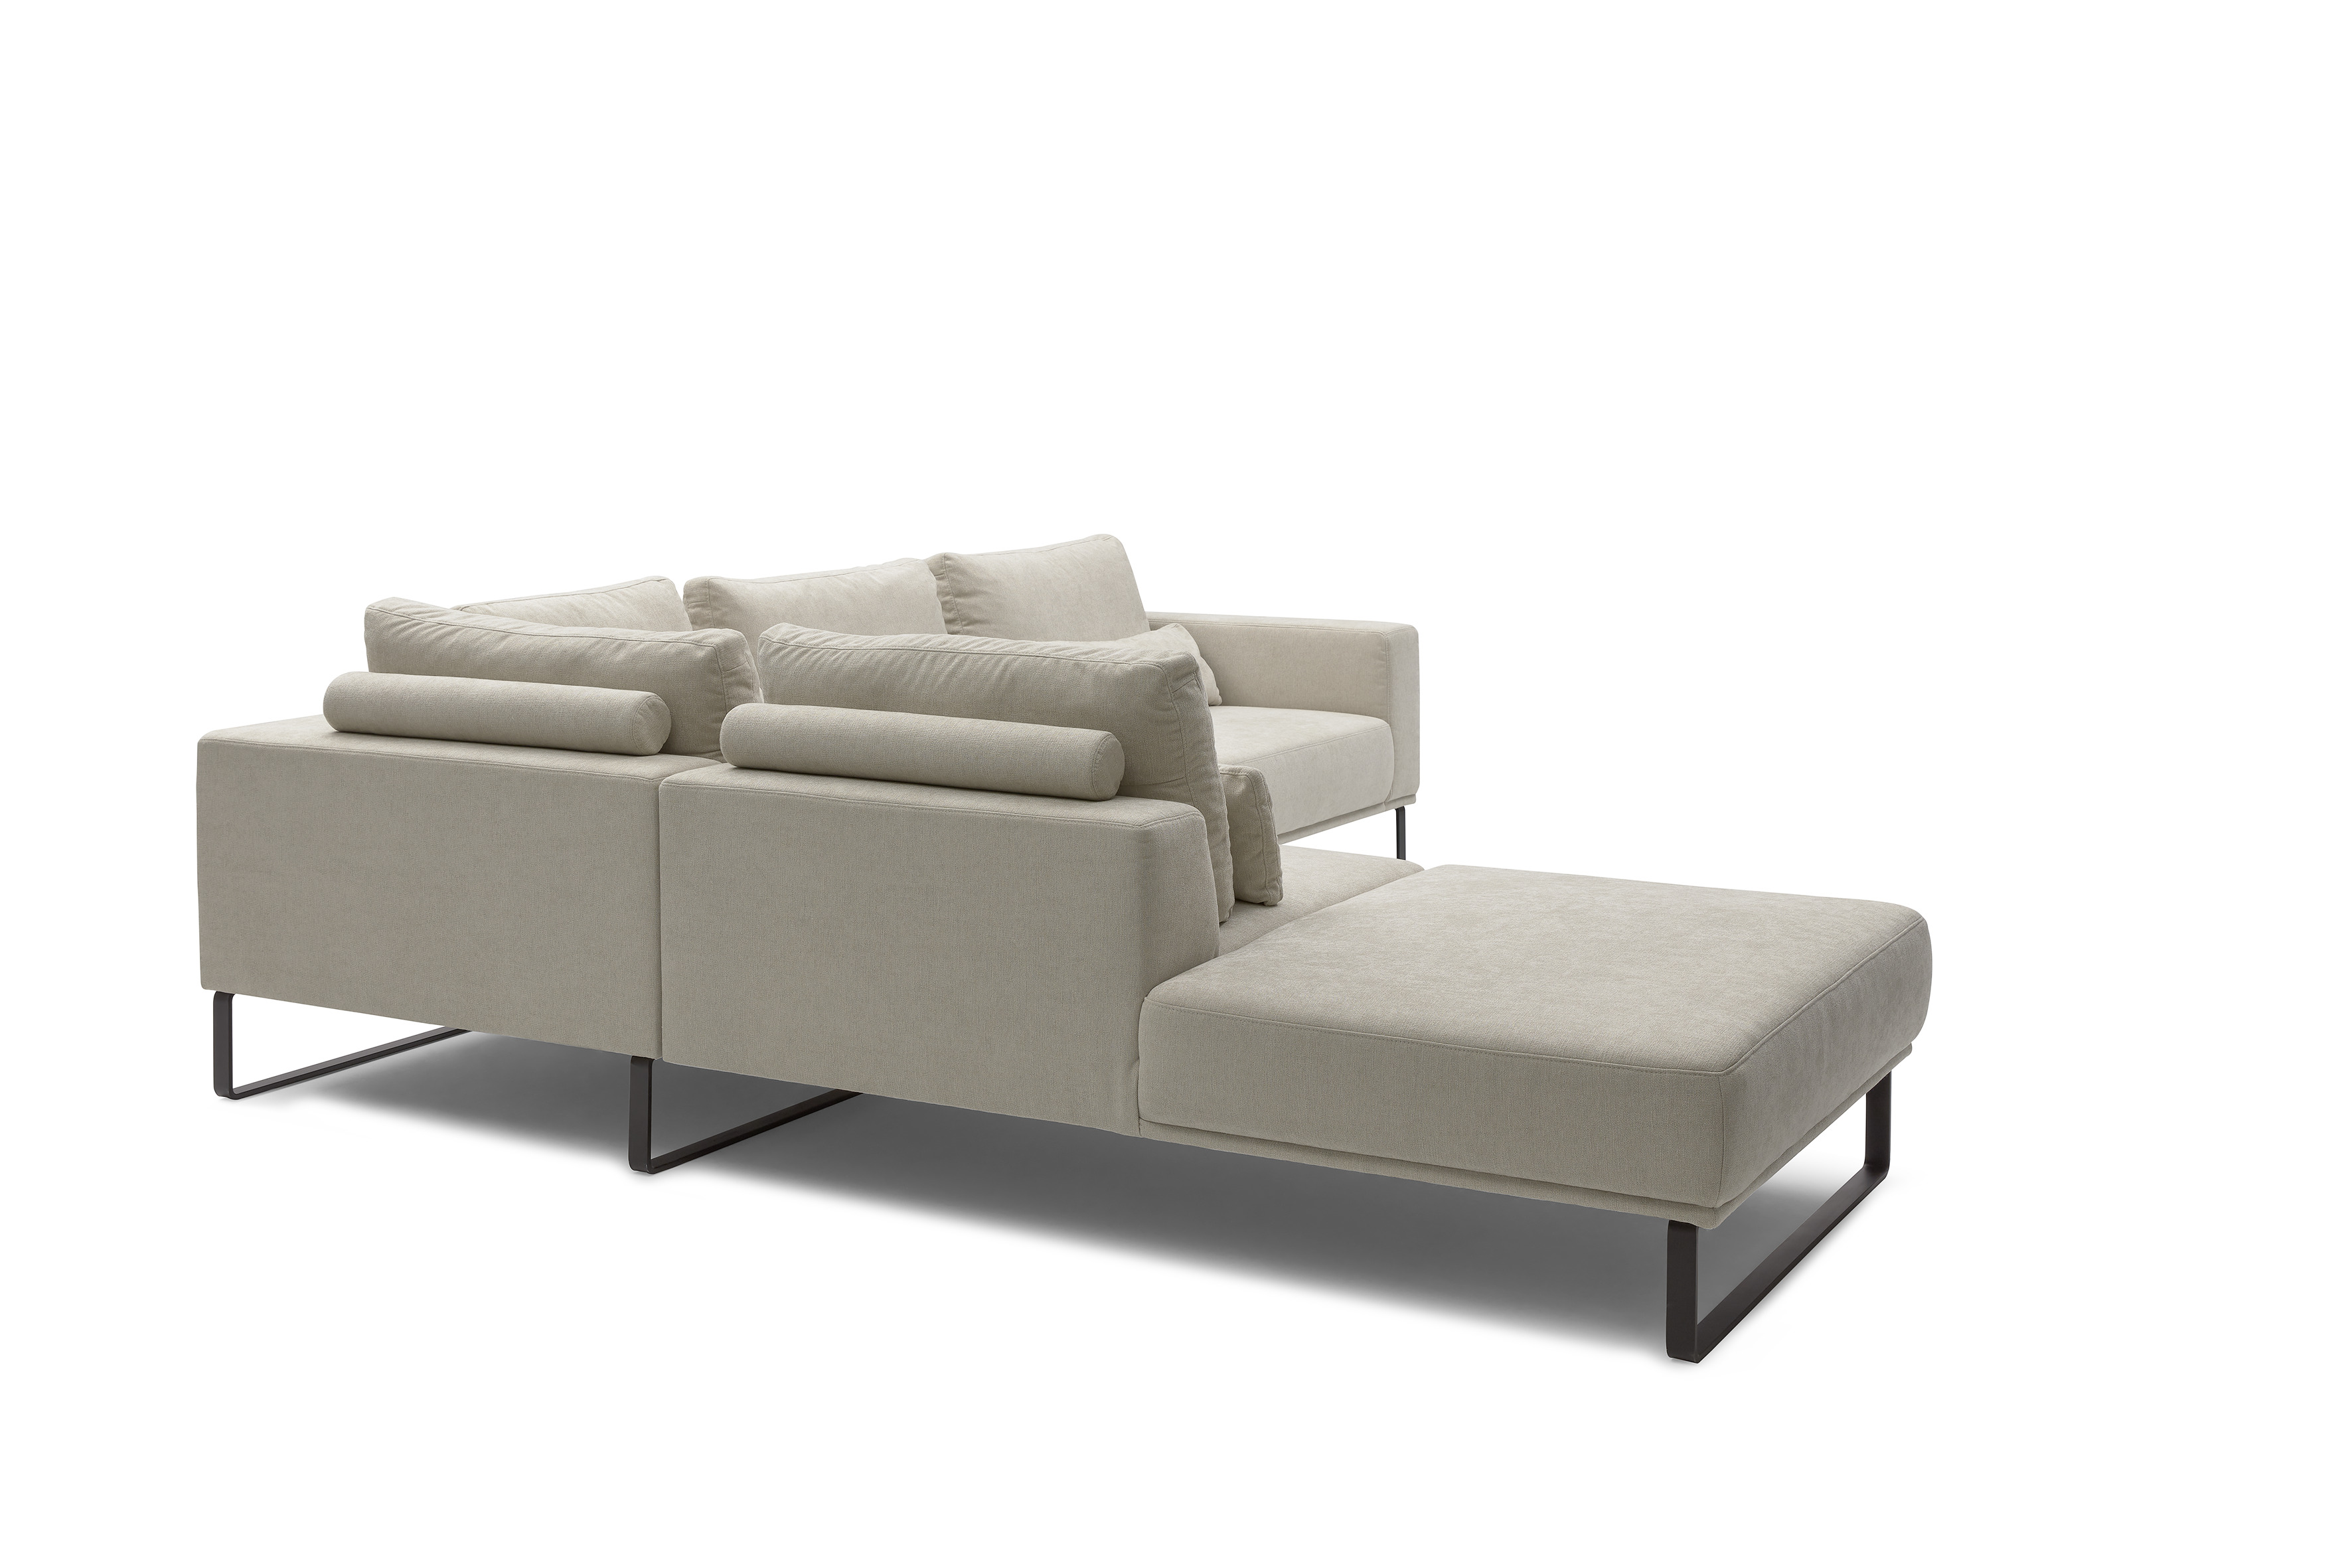 Musterring JustB! PM100 Sofa in Creme 